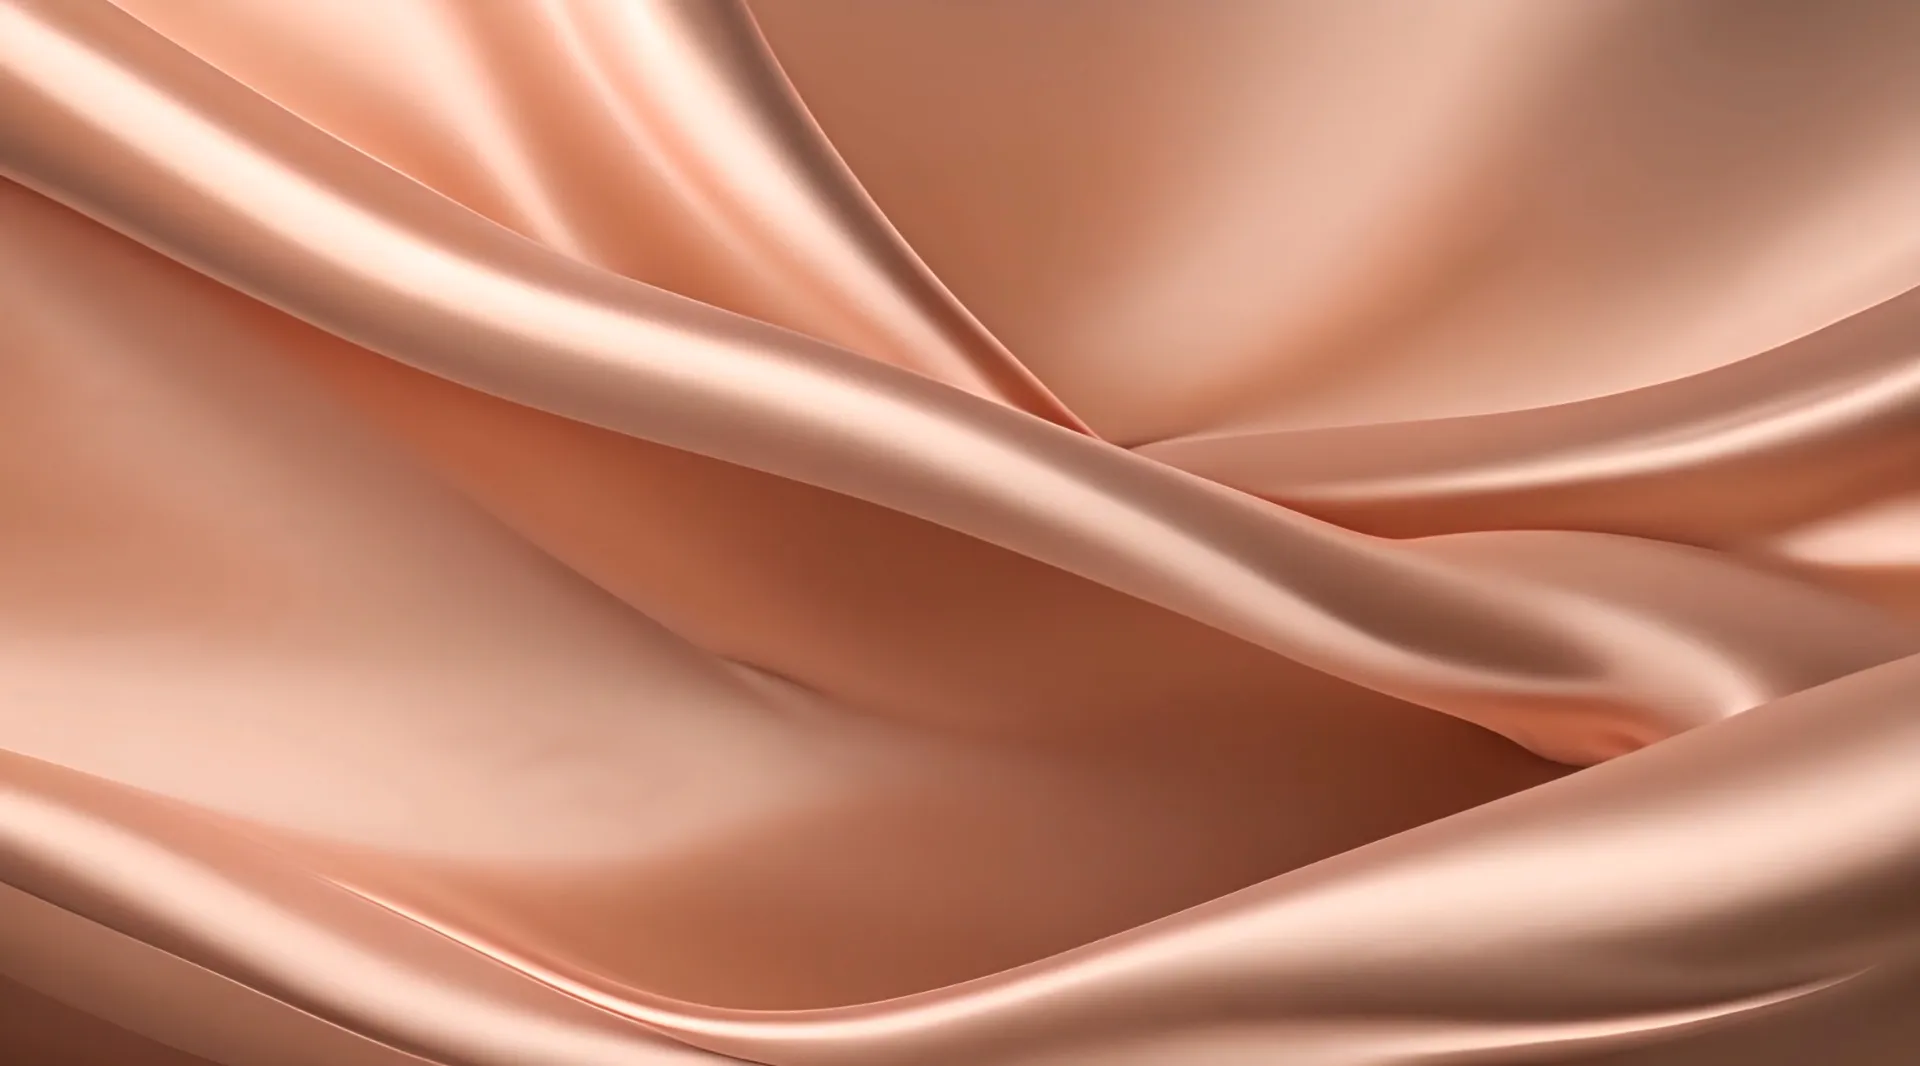 Soft Pink Silk Texture in Gentle Motion Backdrop